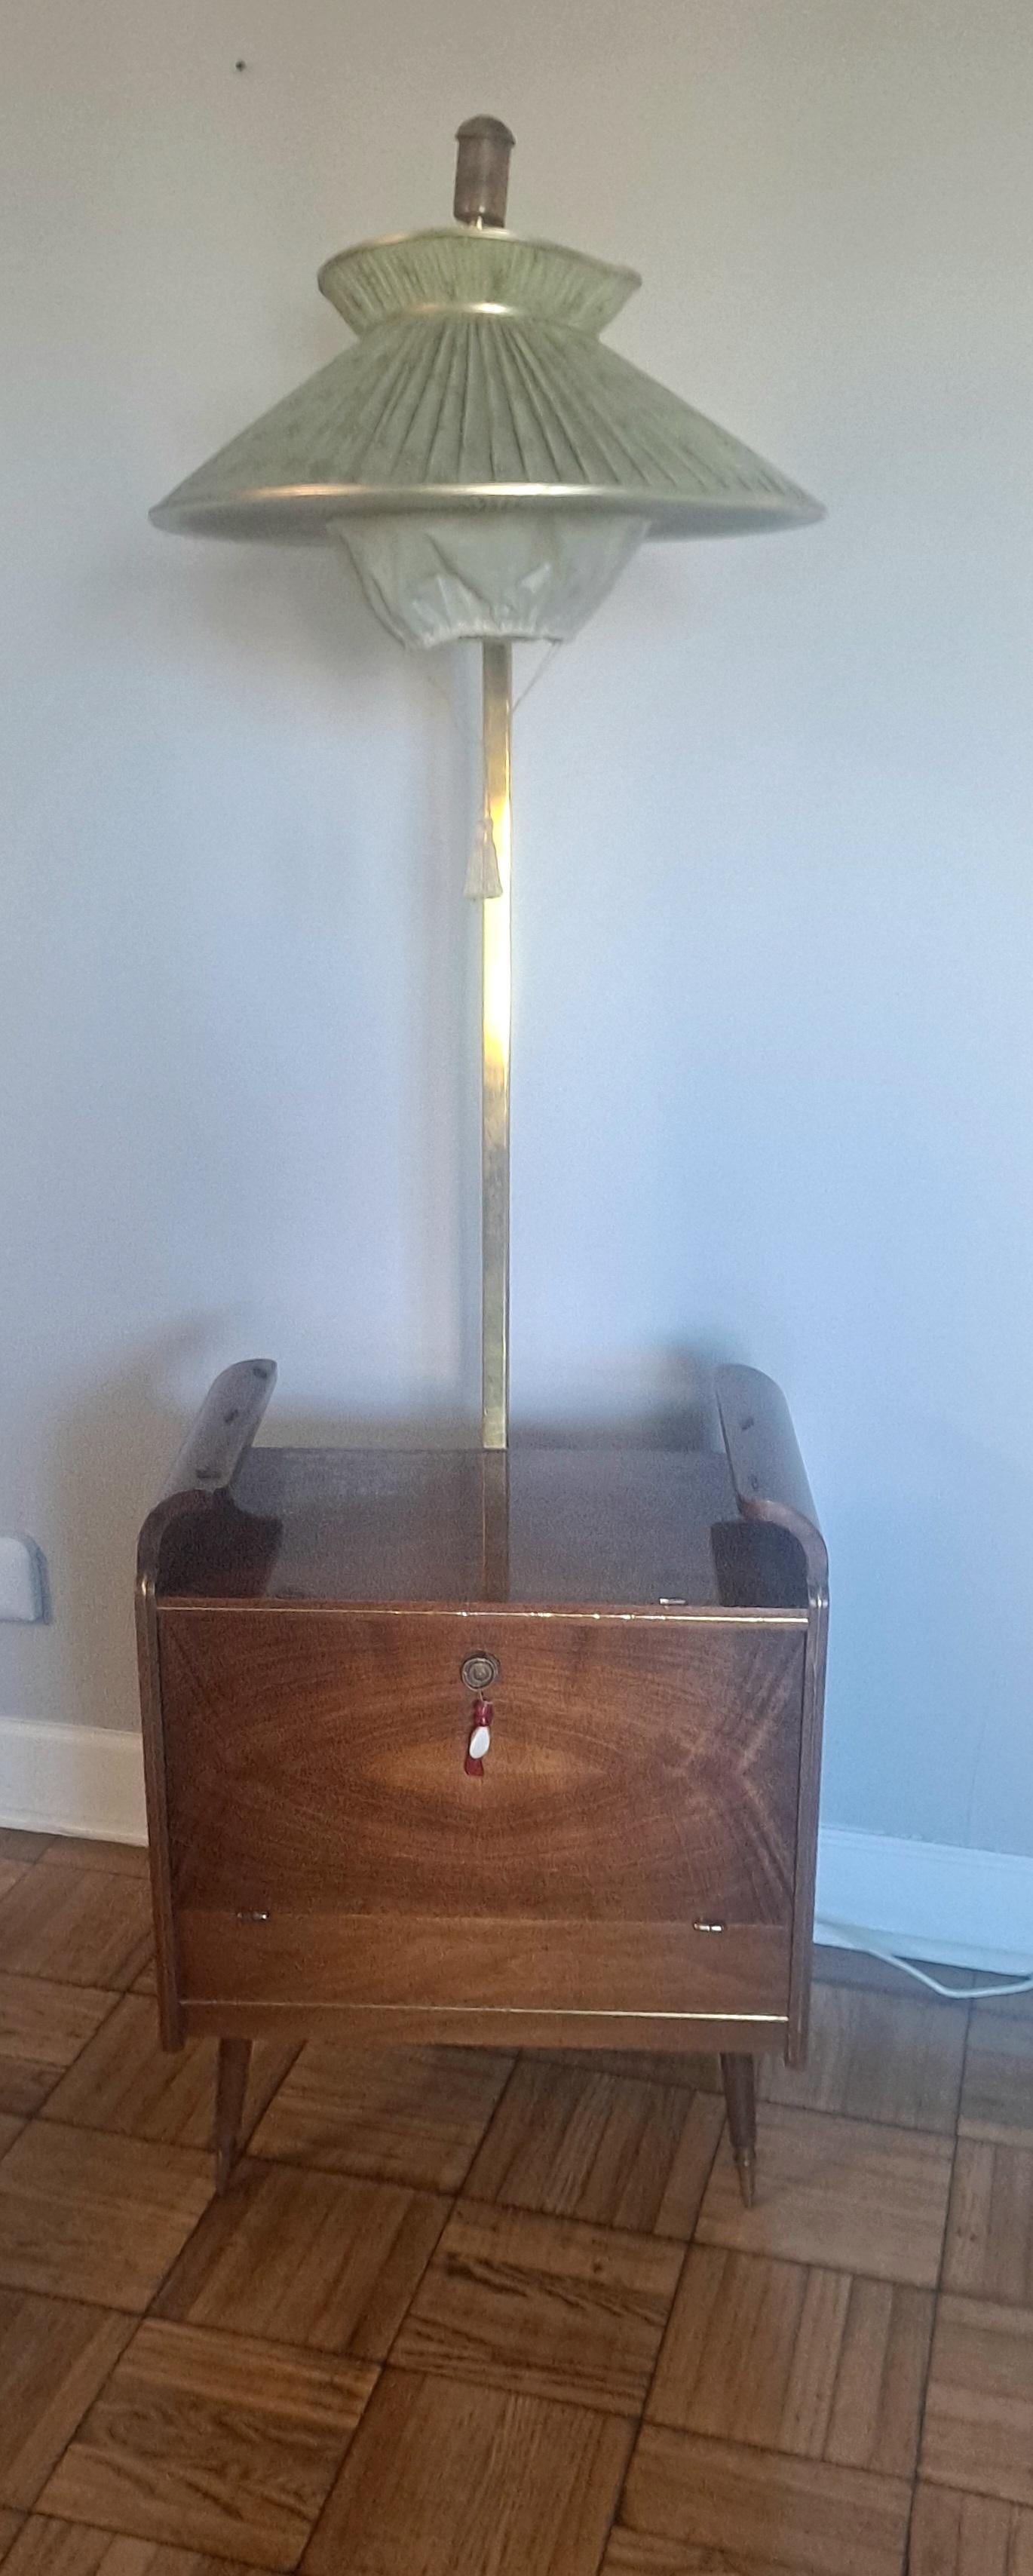  Italian 1950s floor lamp -dry bar. Dry bar have 2 lights bulbs and  when the door closes, the switch automatically turns off. Switch for the floor lamp is on the floor neck back. The legs brass boots are on the bottom of the lamp. Walnut wood base